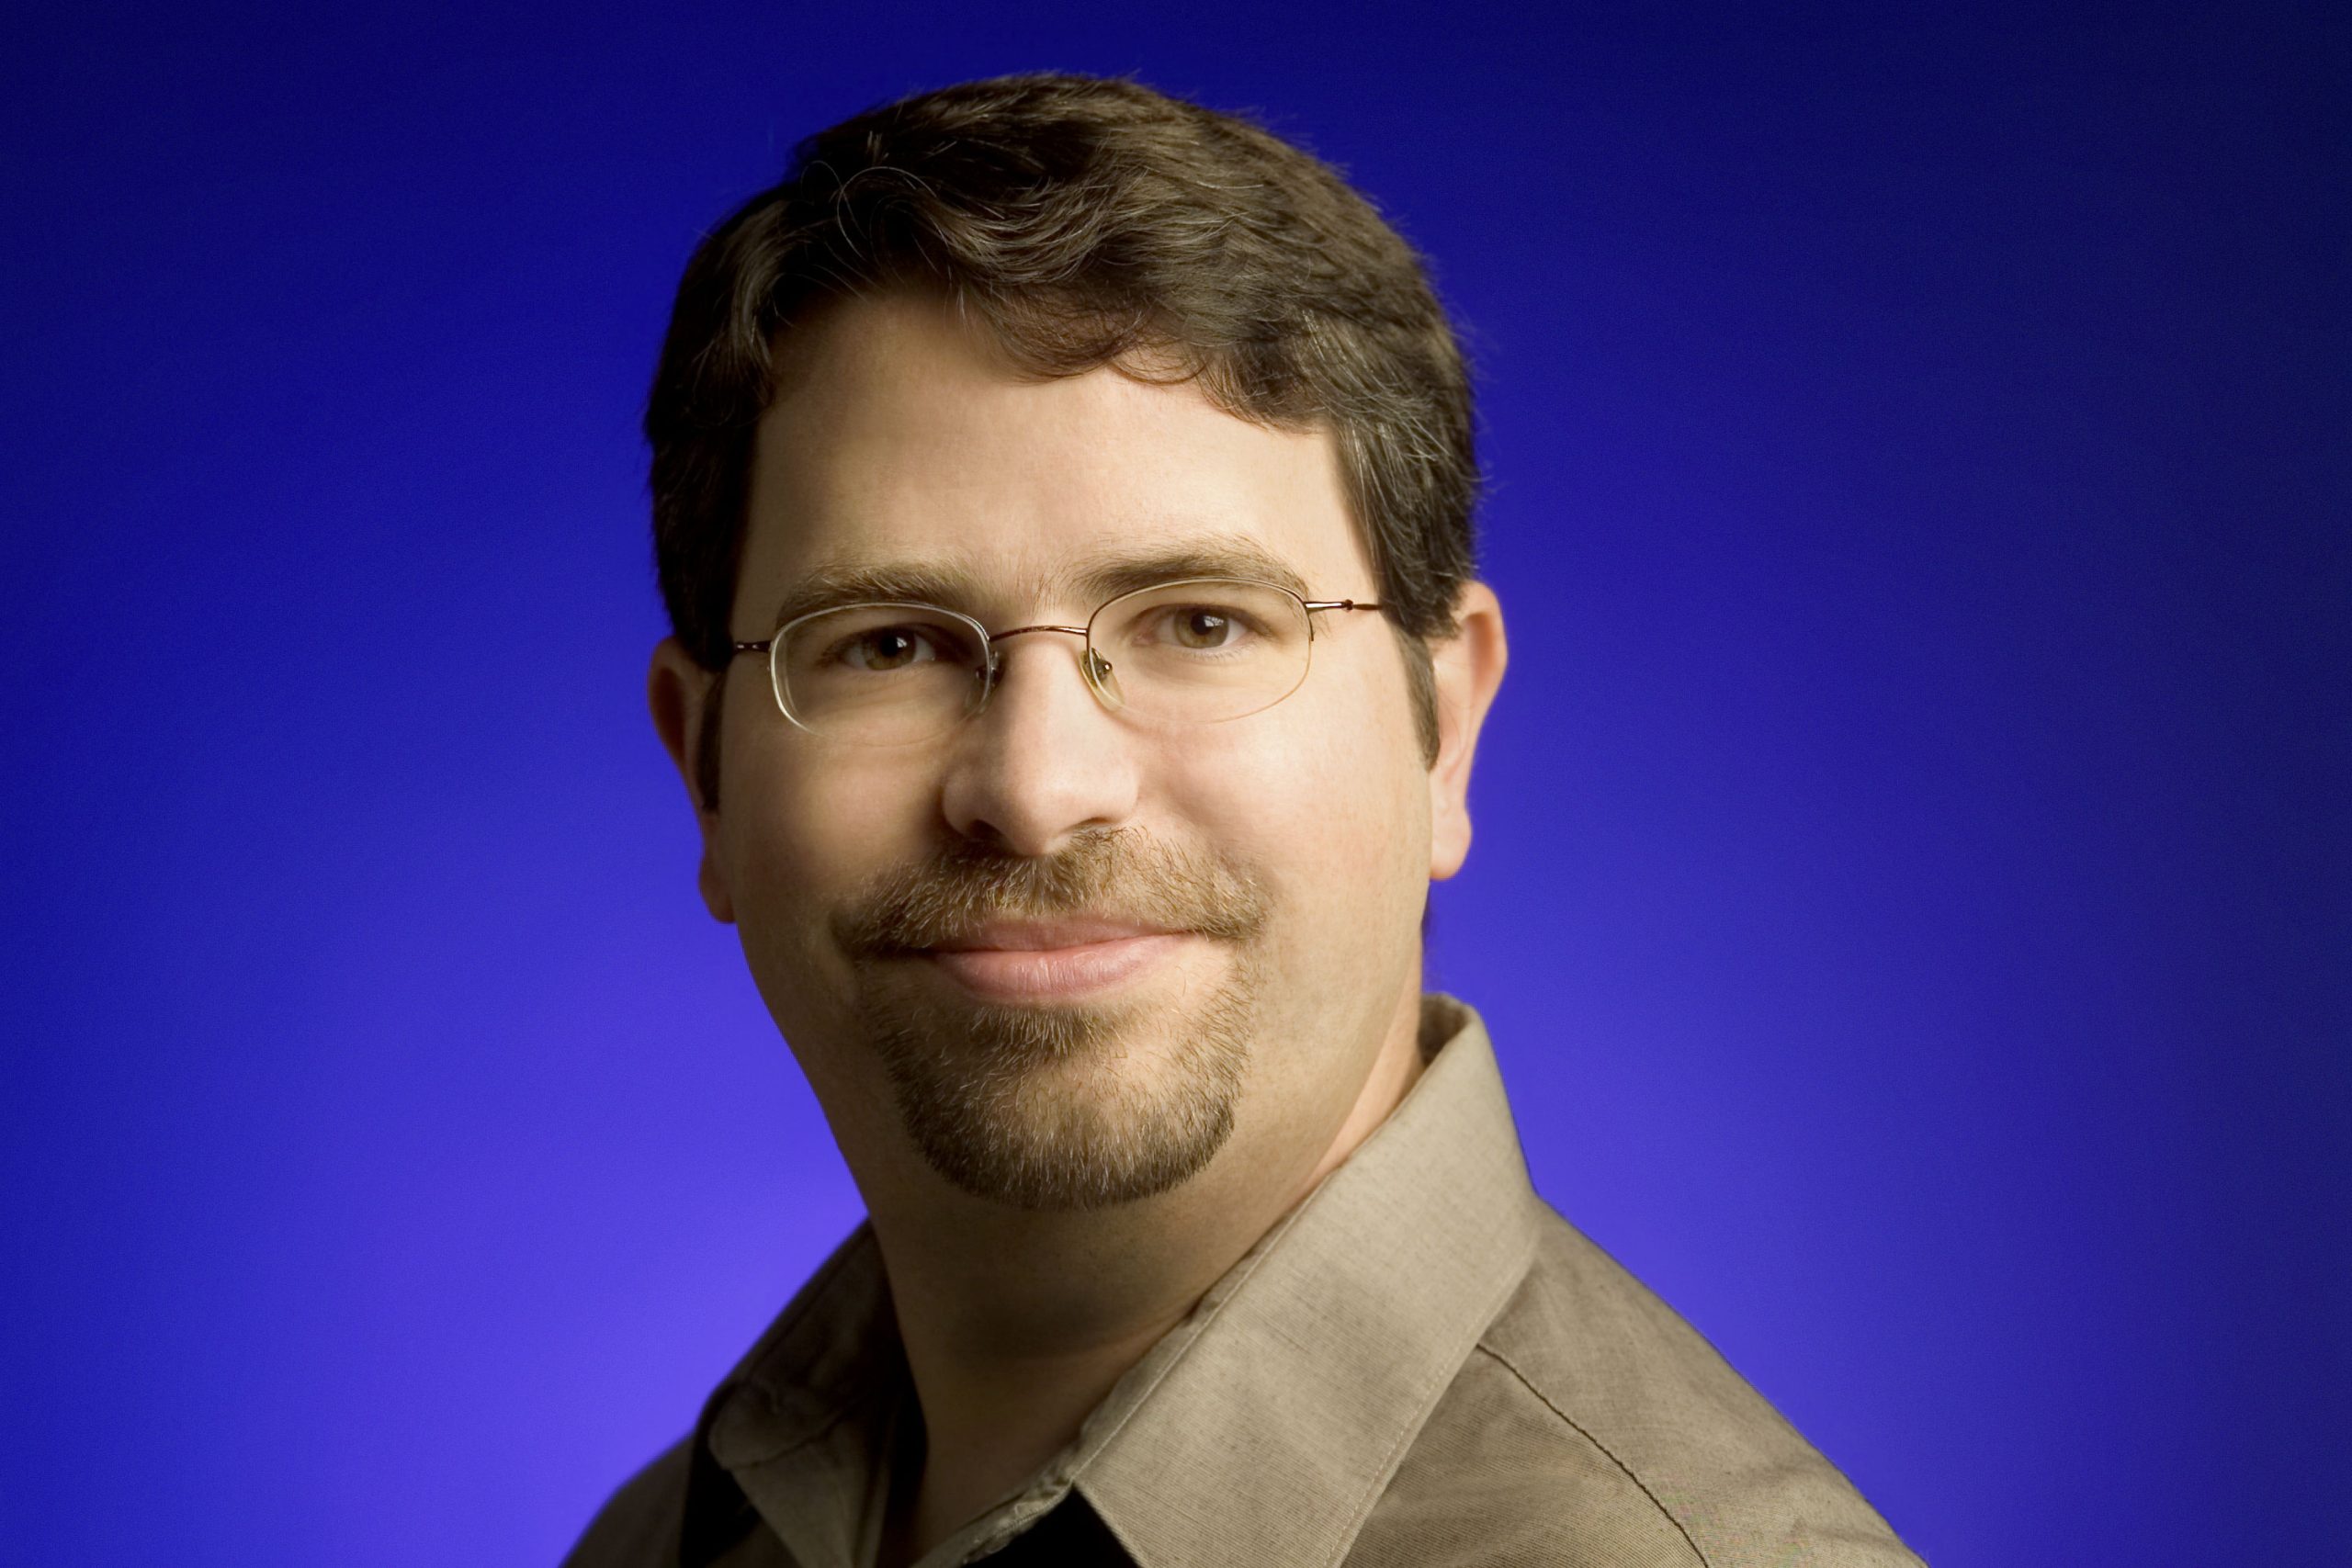 Google's Matt Cutts recently said the freshness factor isn't necessarily relevant for all kinds of content marketing.